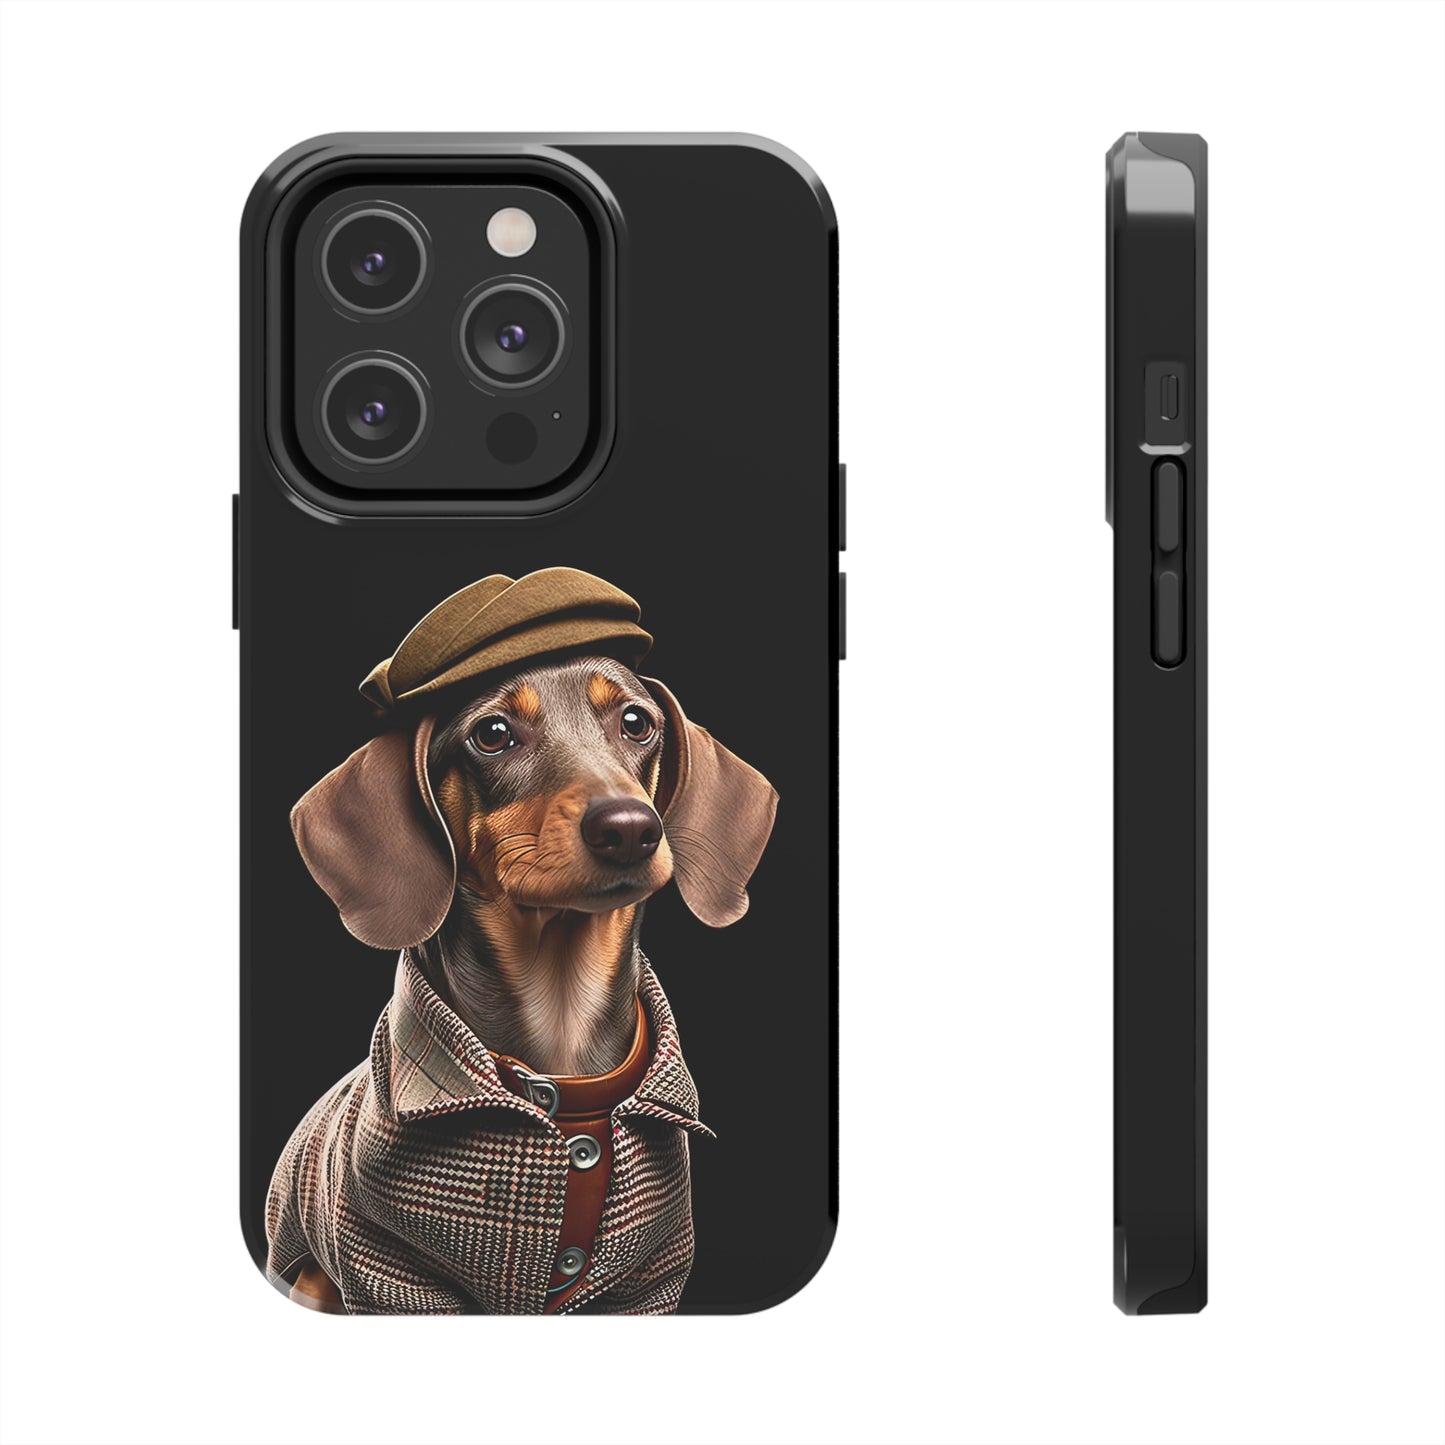 Donny Tough Phone Cases in USA - Shaggy Chic